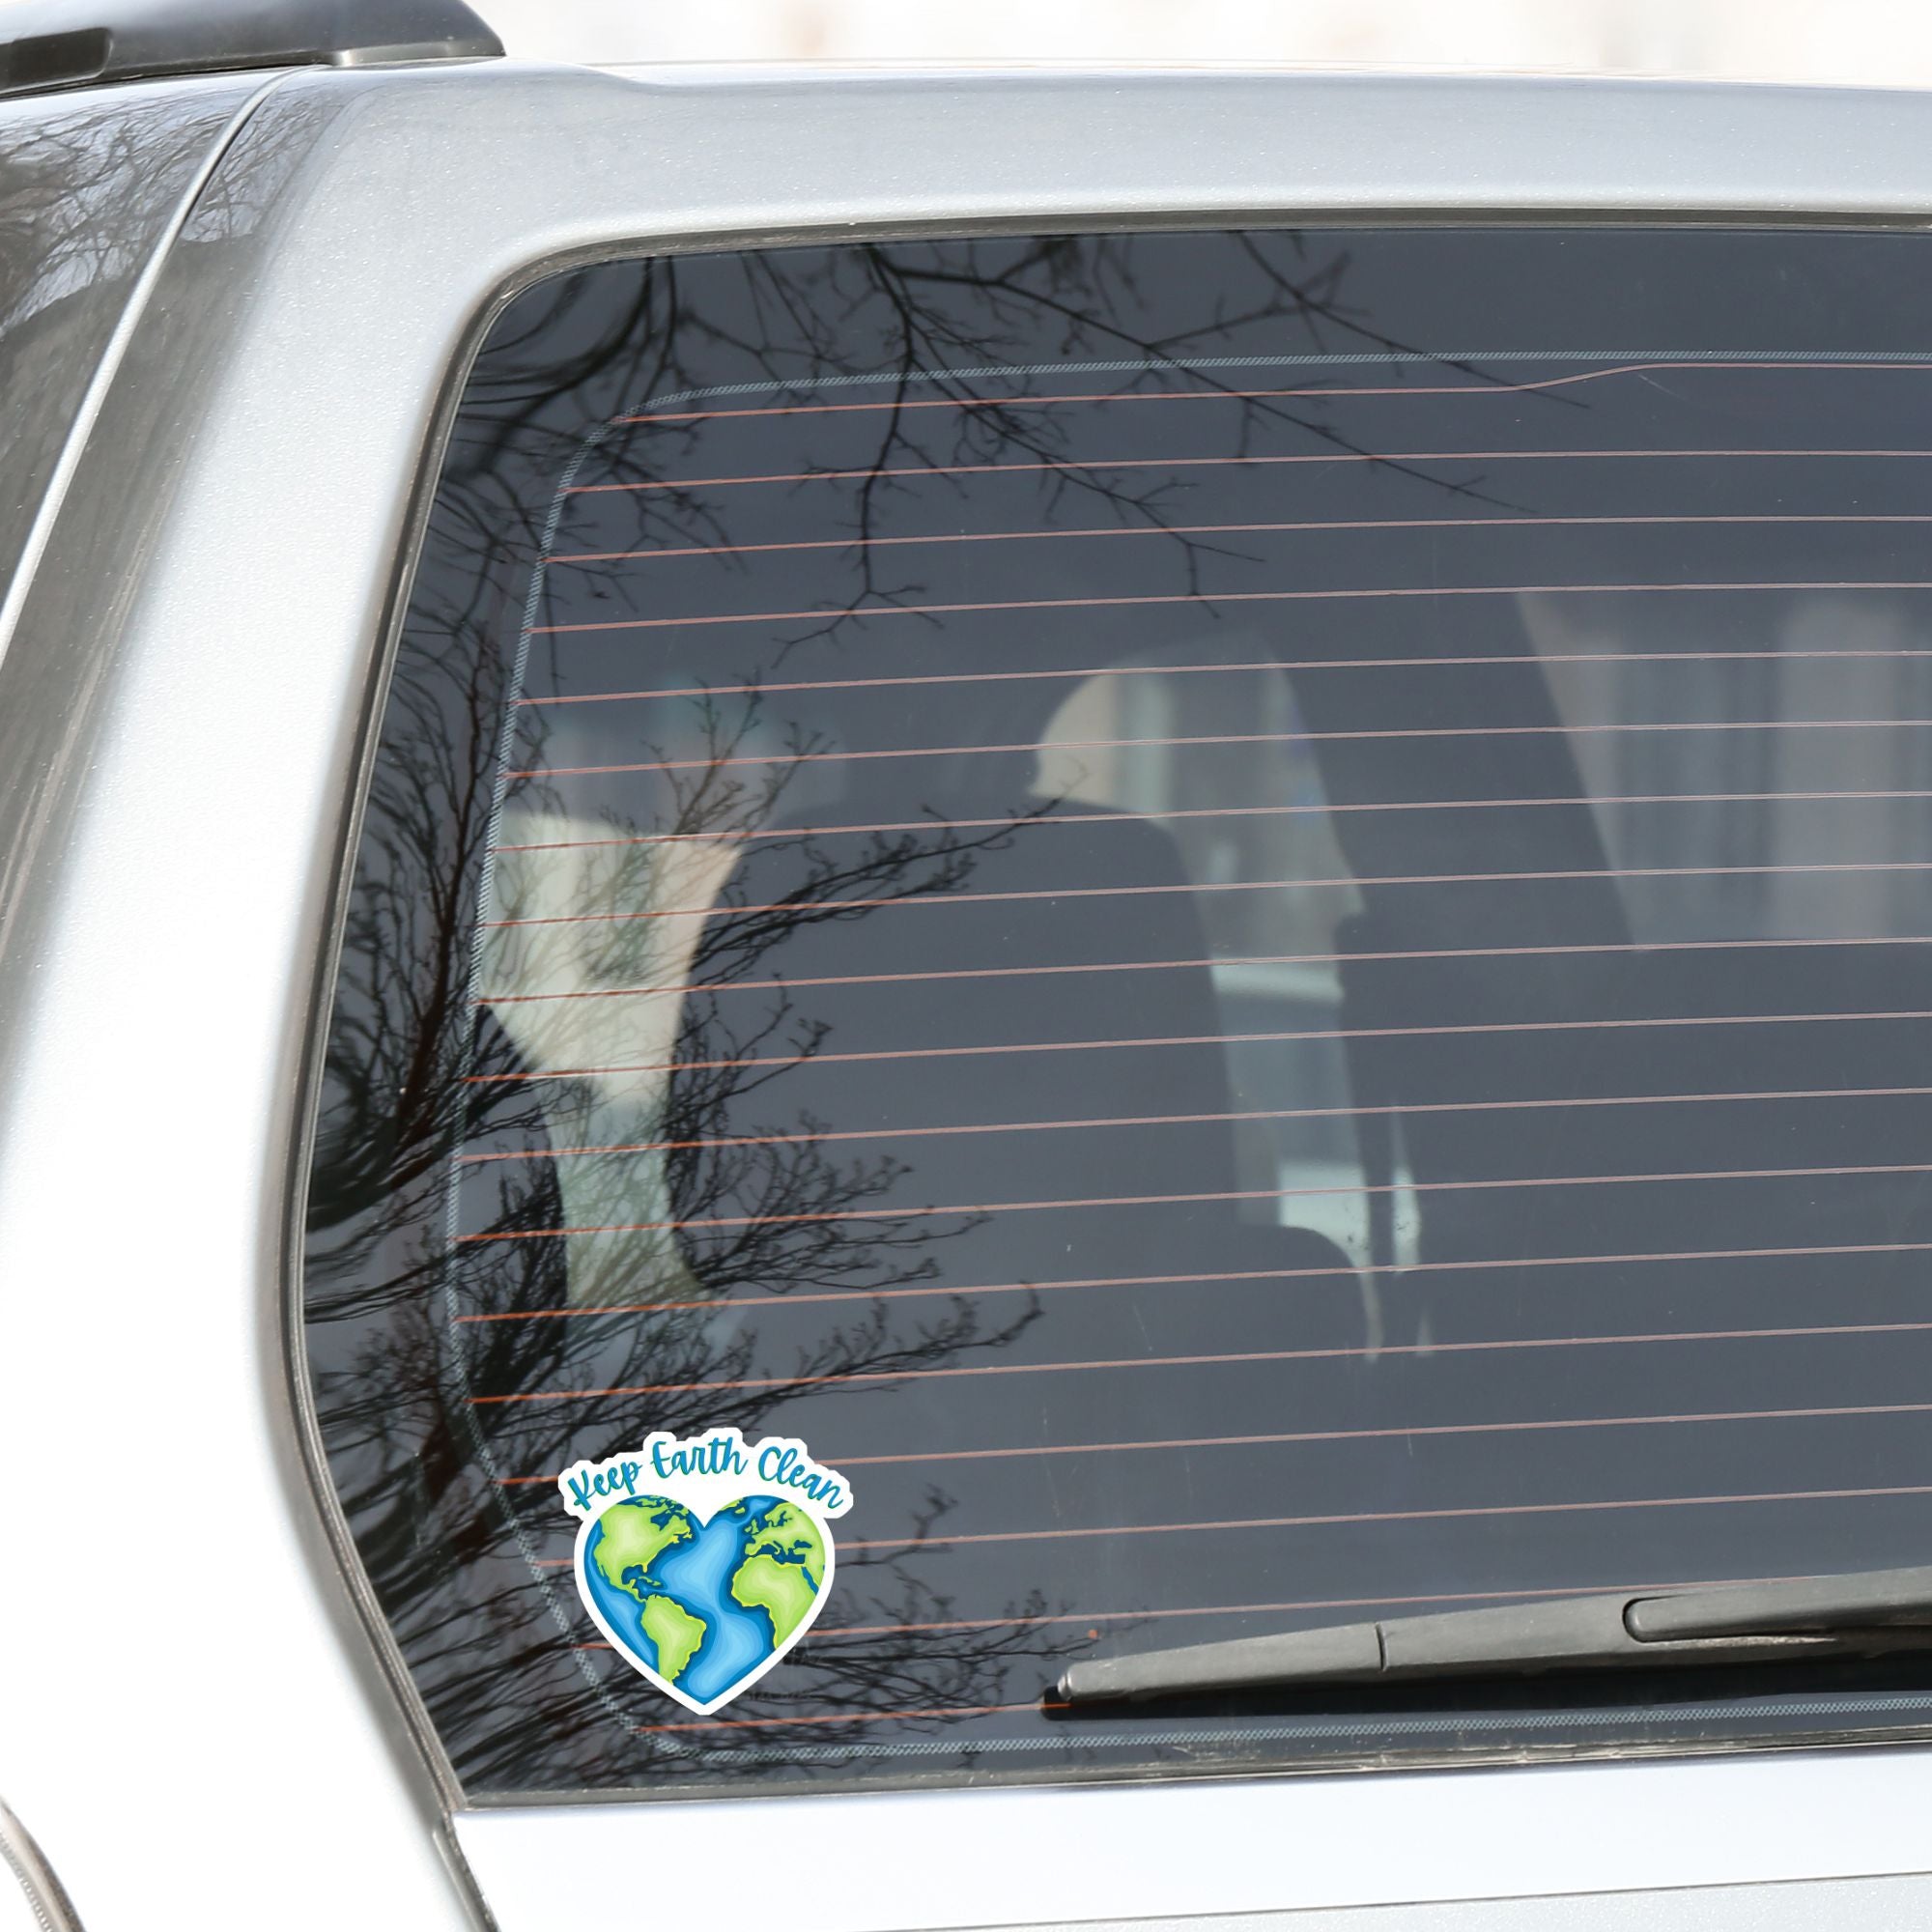 Keep Earth Clean, it's the only home we have! This individual die-cut sticker features the earth in a heart shape with Keep Earth Clean written above. Check out our Inspirational collection for more inspiring stickers! This image shows the Keep Earth Clean die-cut sticker on the back window of a car.